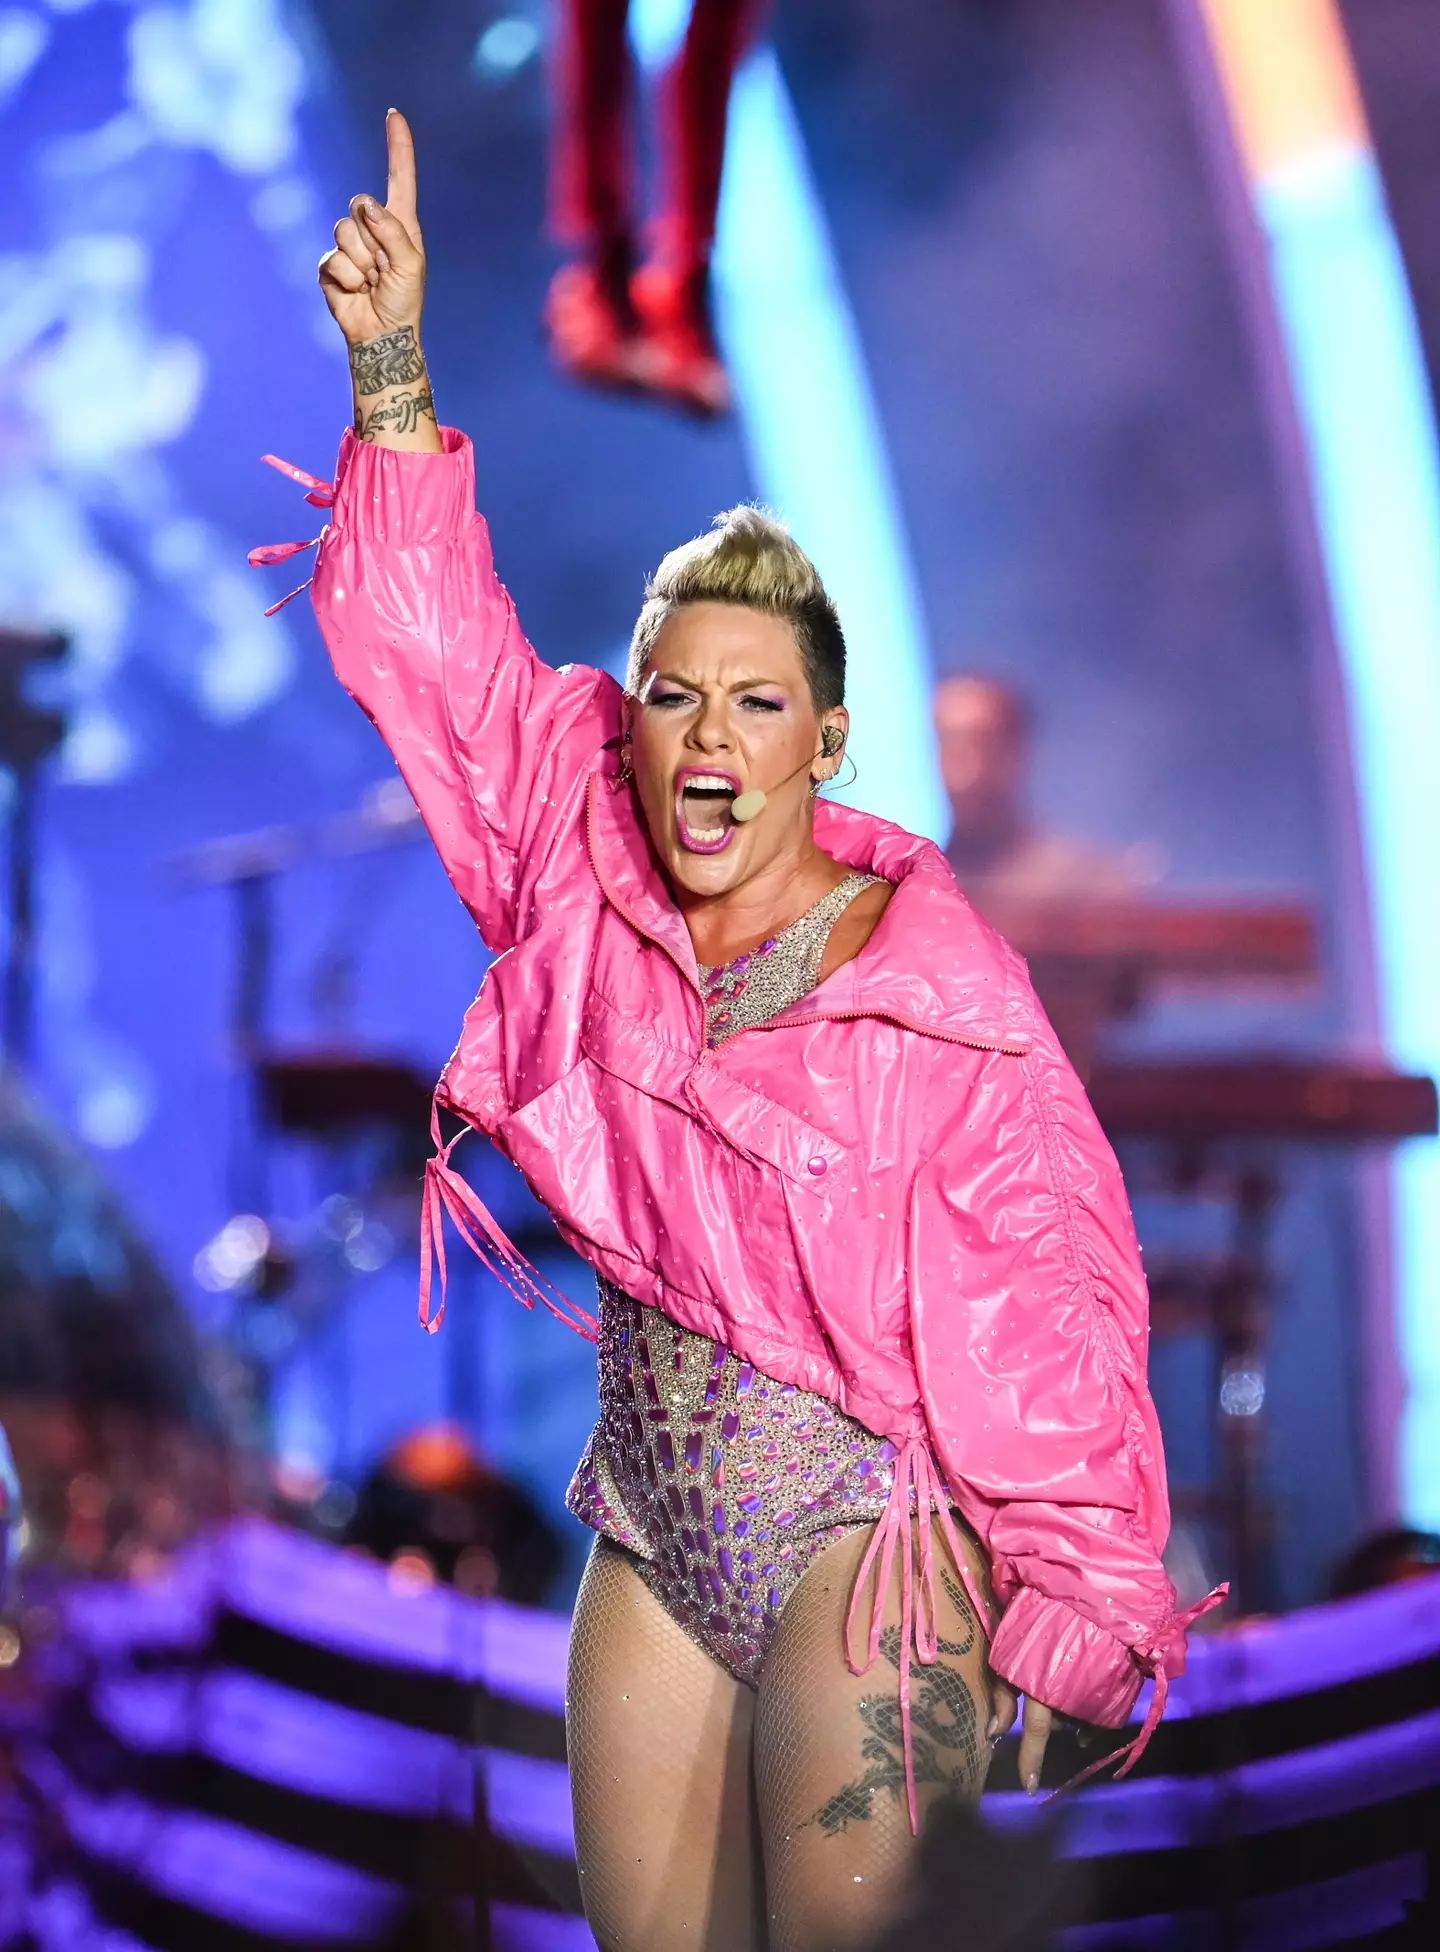 P!nk is such a goofball! I love her more for that!